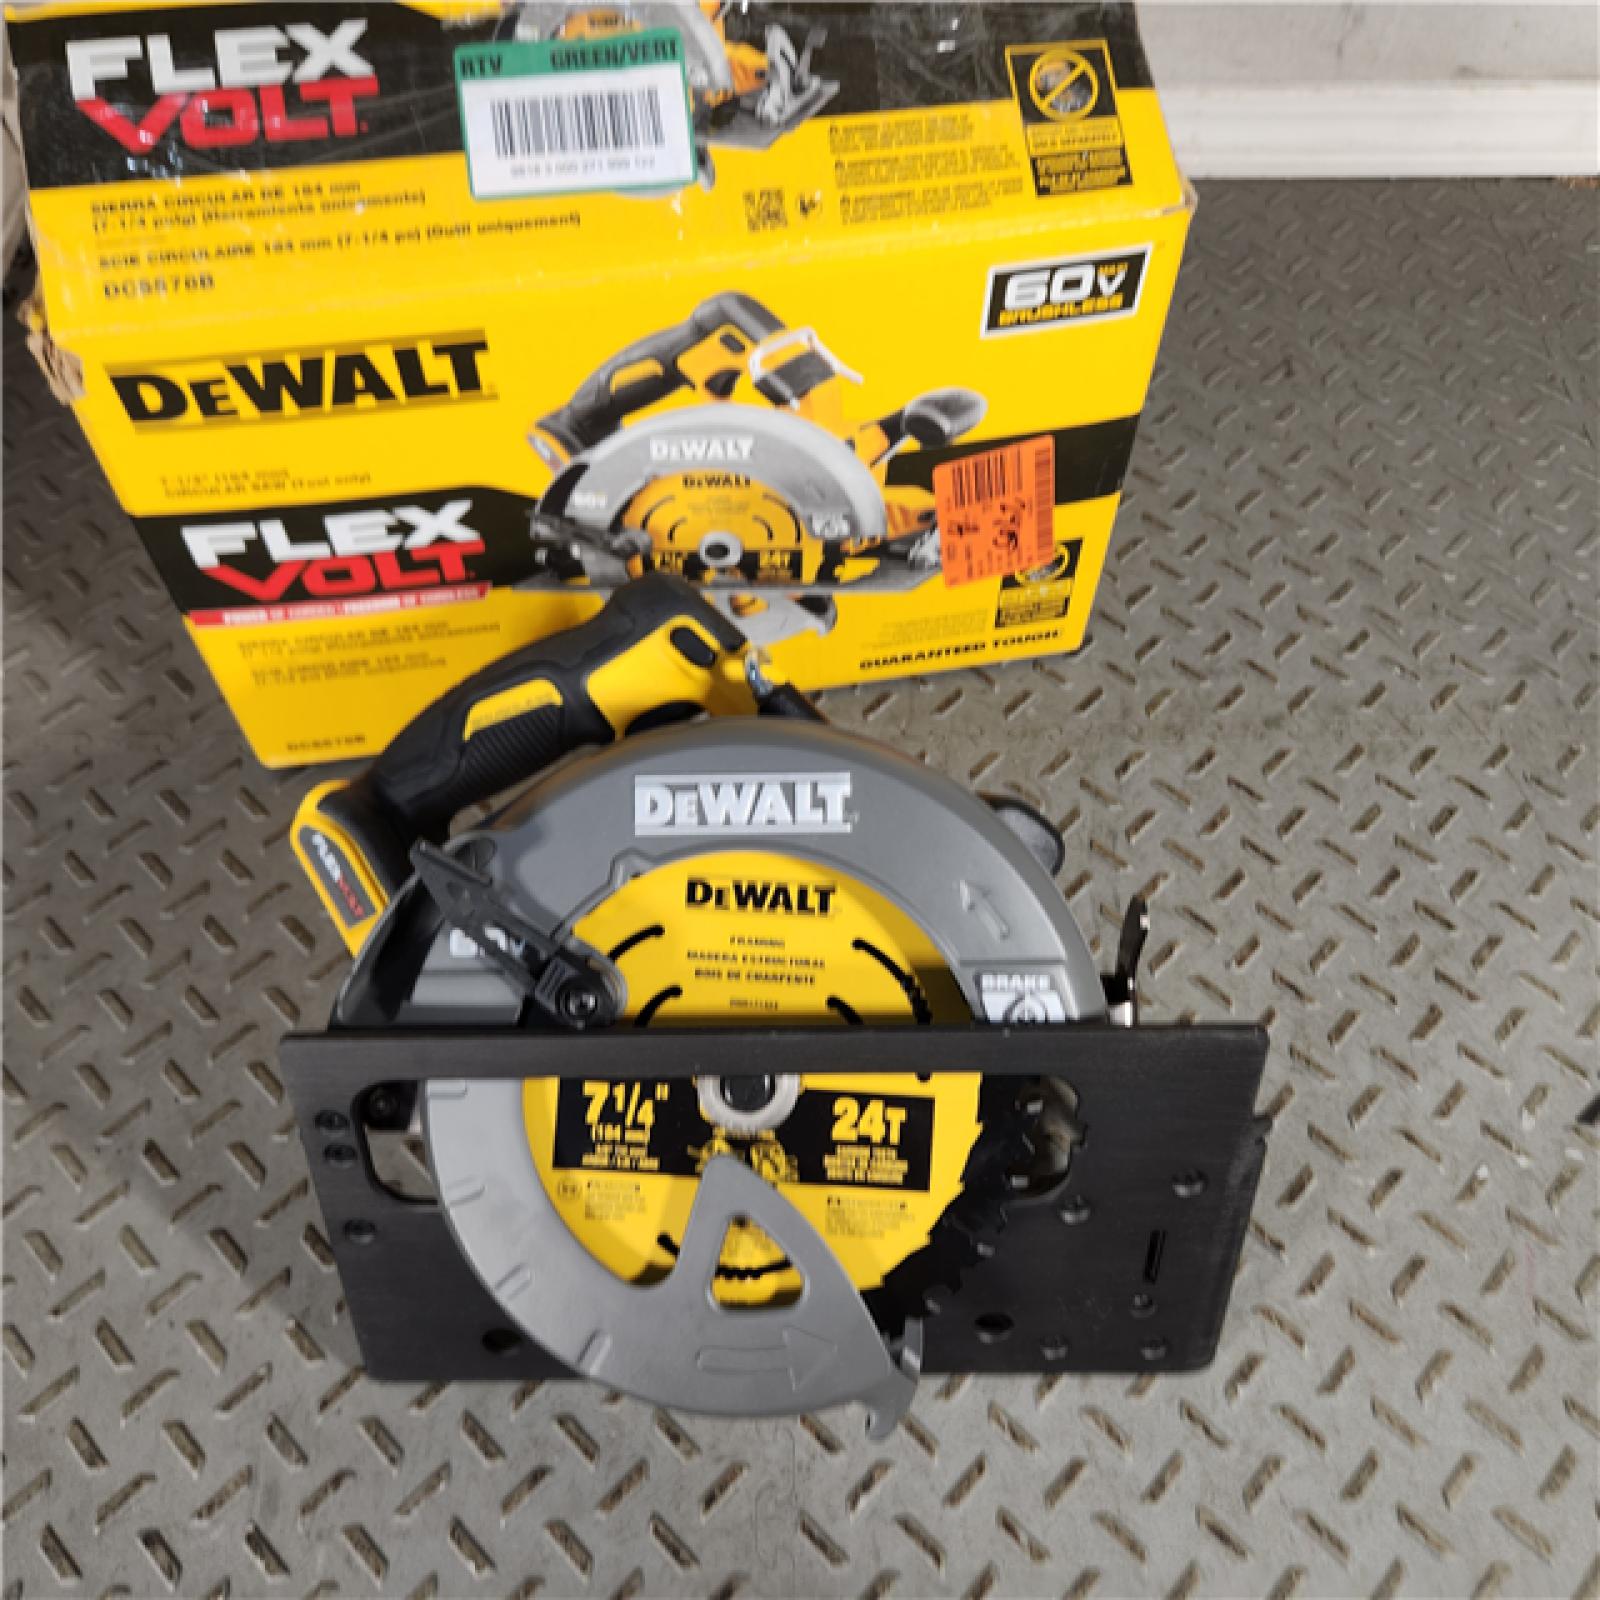 Houston location- AS-IS Dewalt Flexvolt 60V MAX Brushless 7-1/4 Cordless Circular Saw with Brake Bare Tool Only